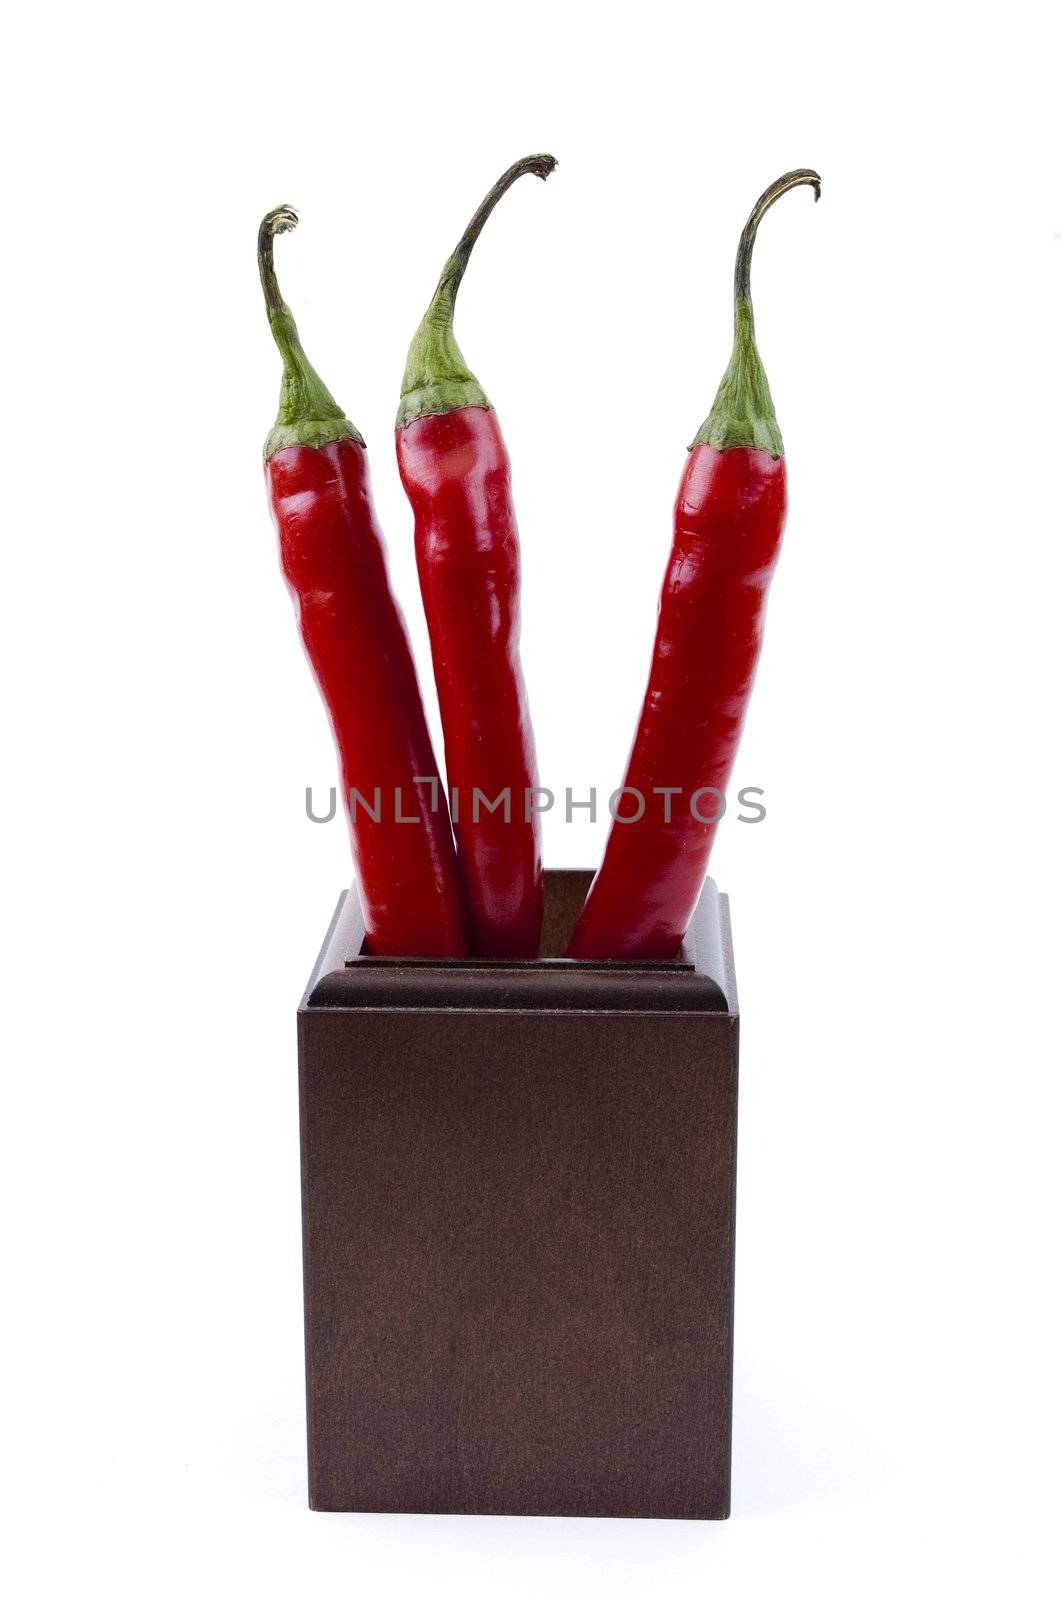 the top three chili peppers in a wooden cup by Triphka